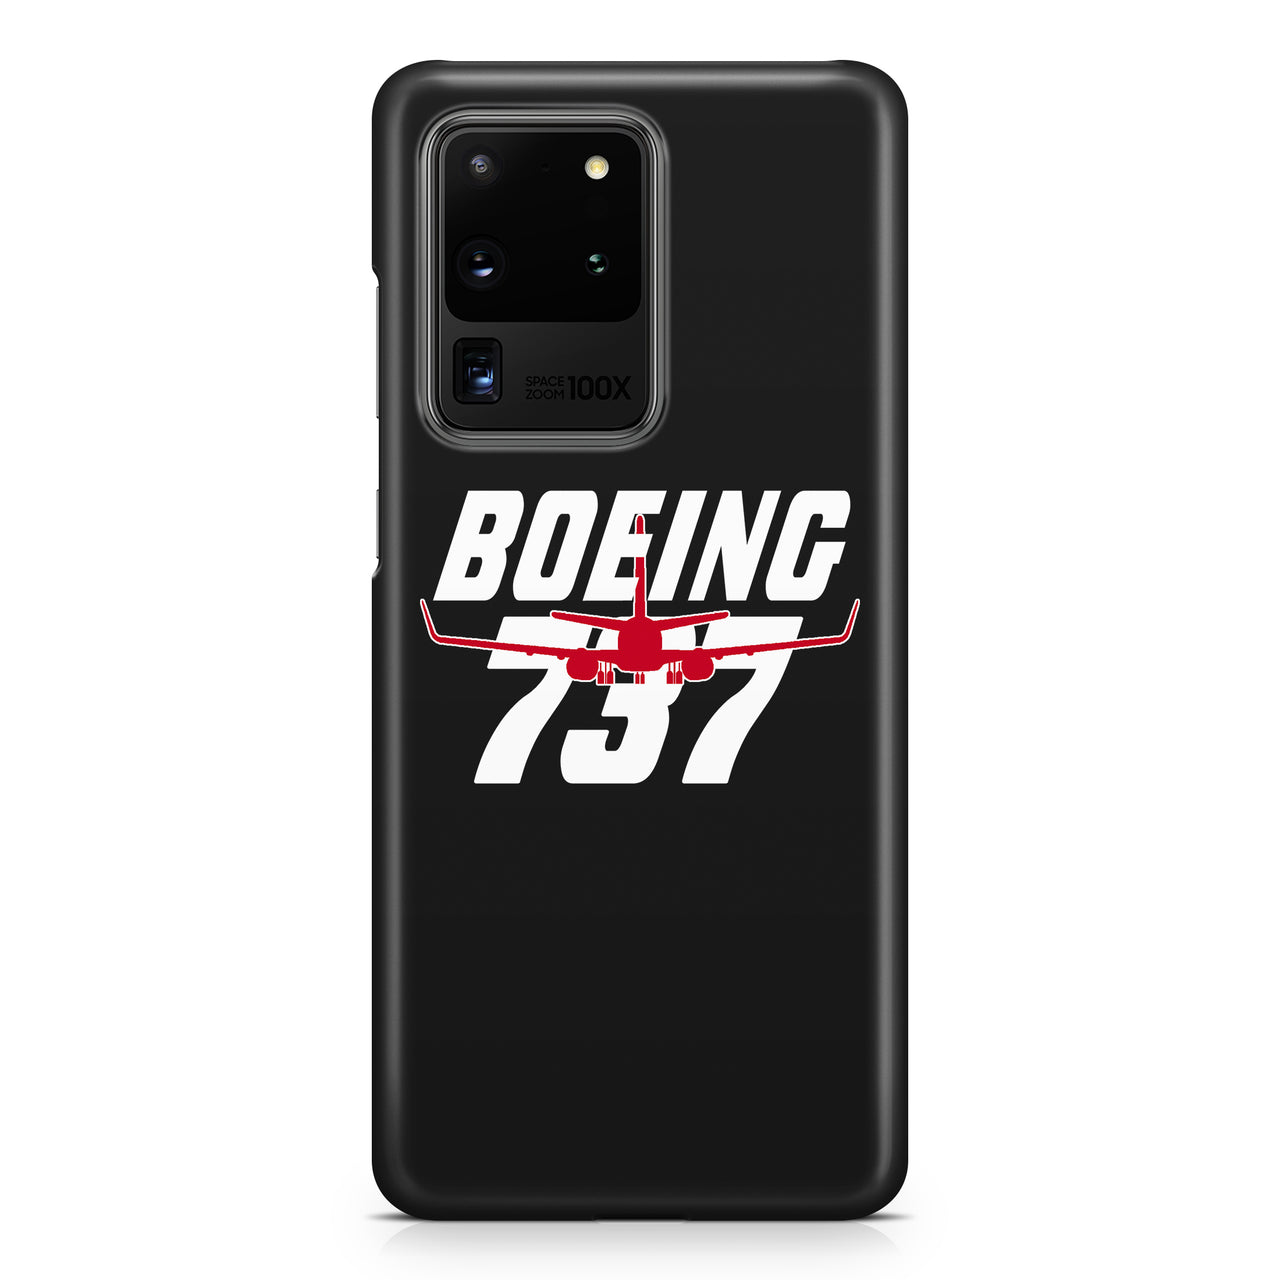 Amazing Boeing 737 Samsung A Cases